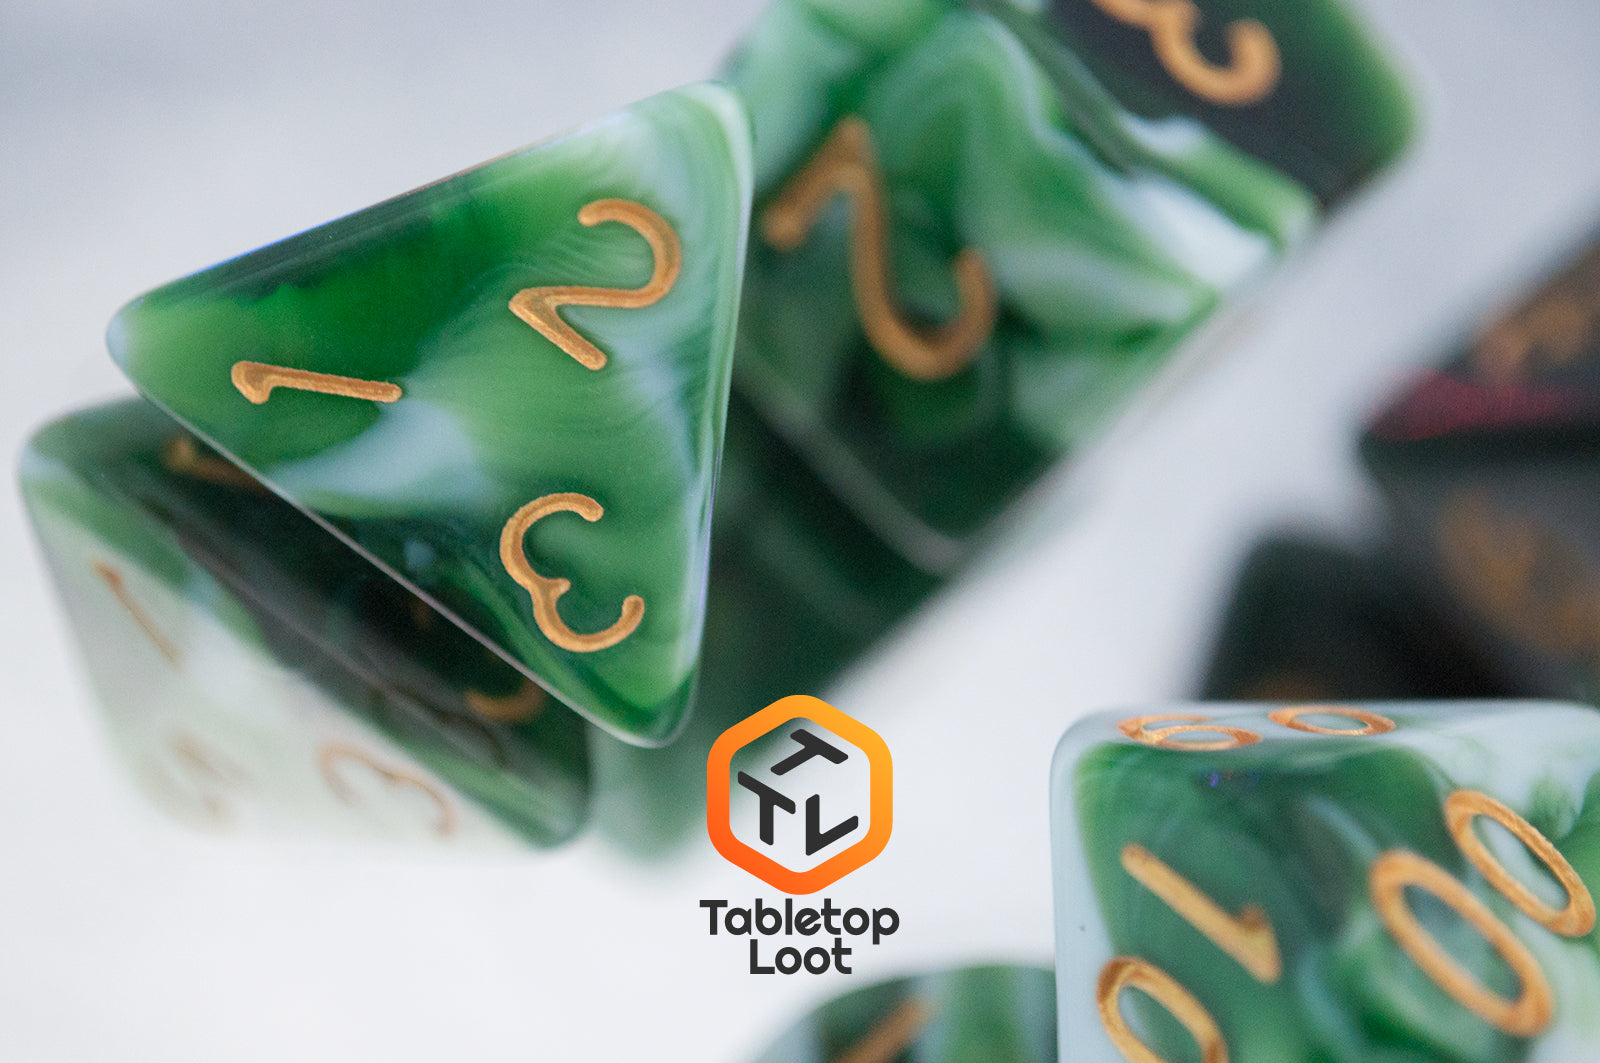 A close up of the D4 from the Jadeite Cabbage 7 piece dice set from Tabletop Loot with swirls of shades of green and white, numbered in gold.